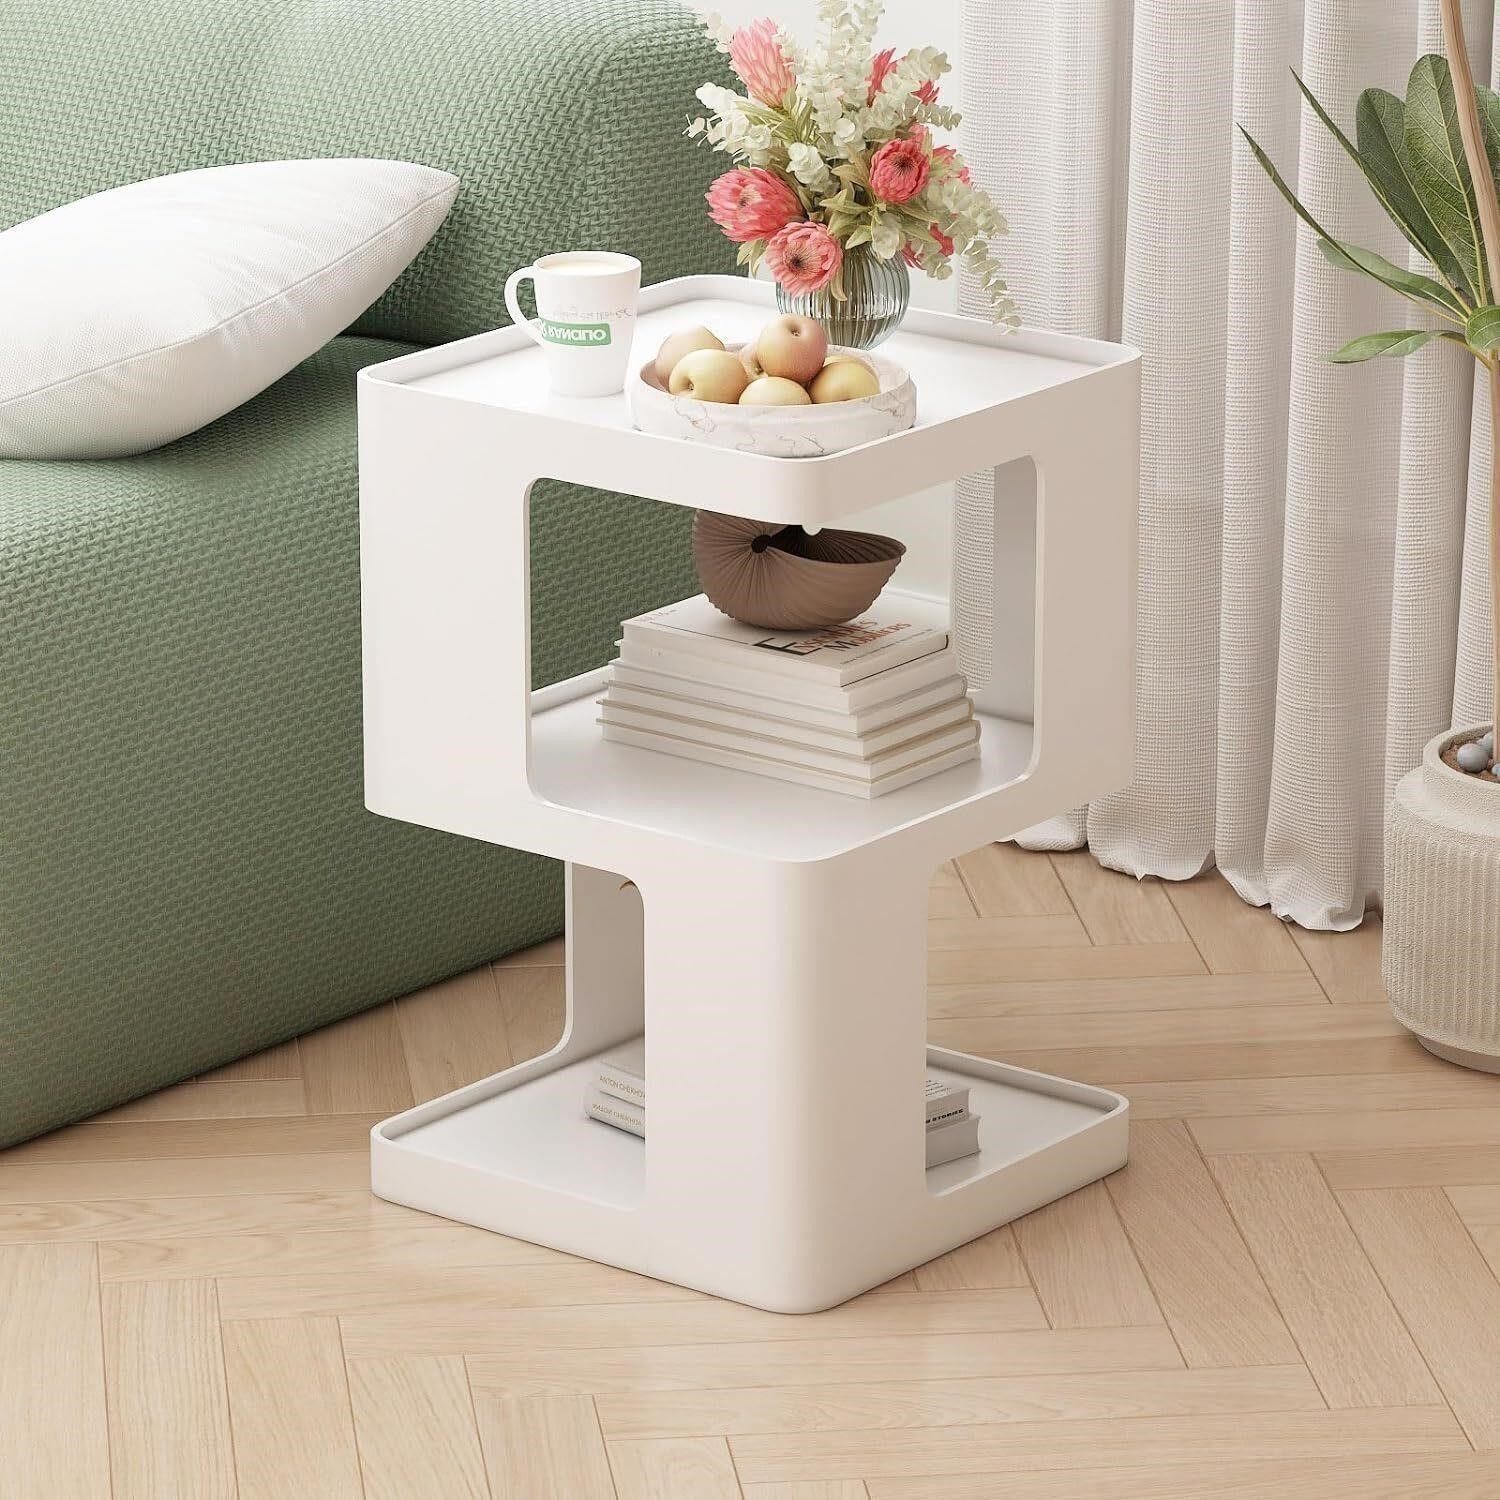 $120 Small Square End Table 3 Tiers (White)